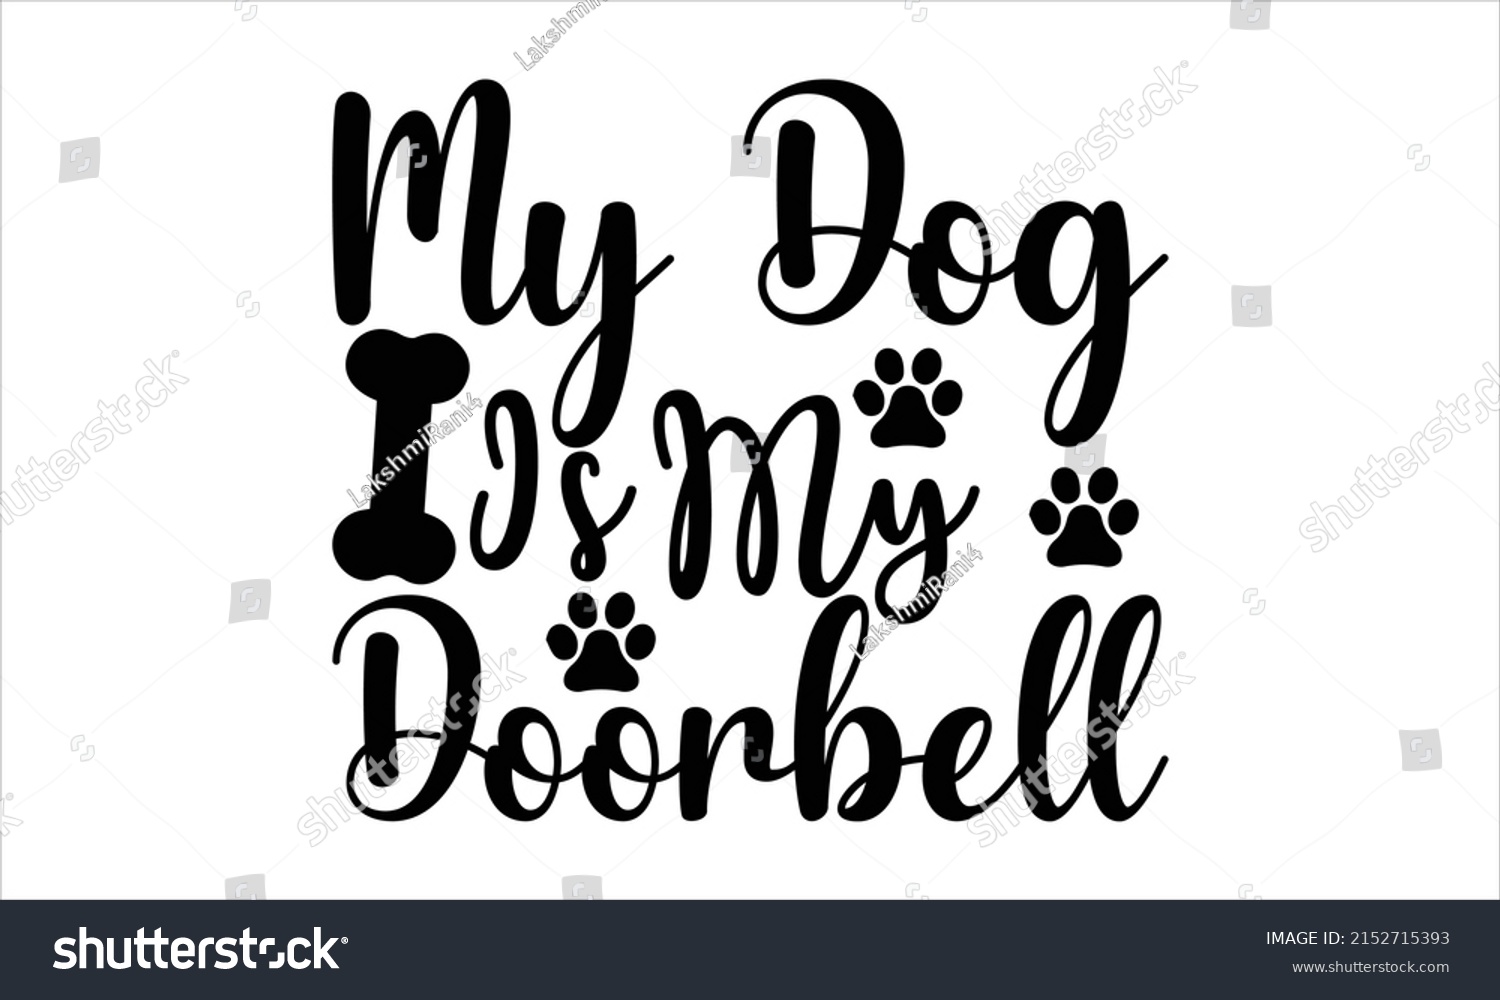 SVG of  My dog is my doorbell  -   Lettering design for greeting banners, Mouse Pads, Prints, Cards and Posters, Mugs, Notebooks, Floor Pillows and T-shirt prints design.
 svg